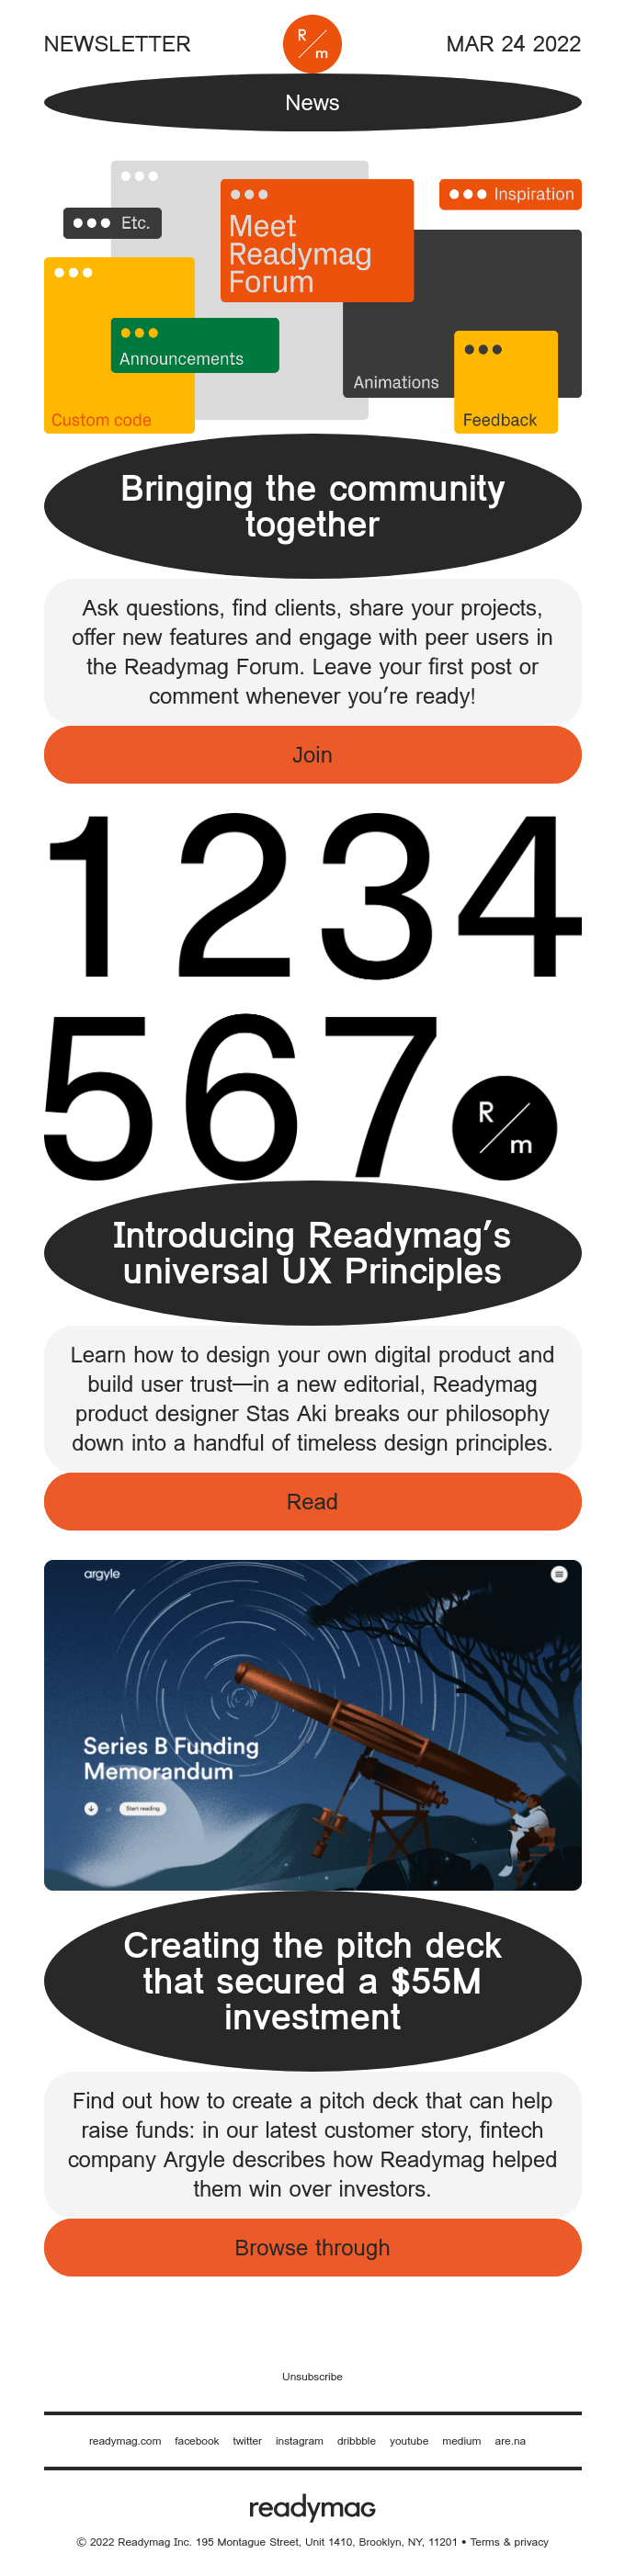 Join a supportive new space for users & learn universal UX principles